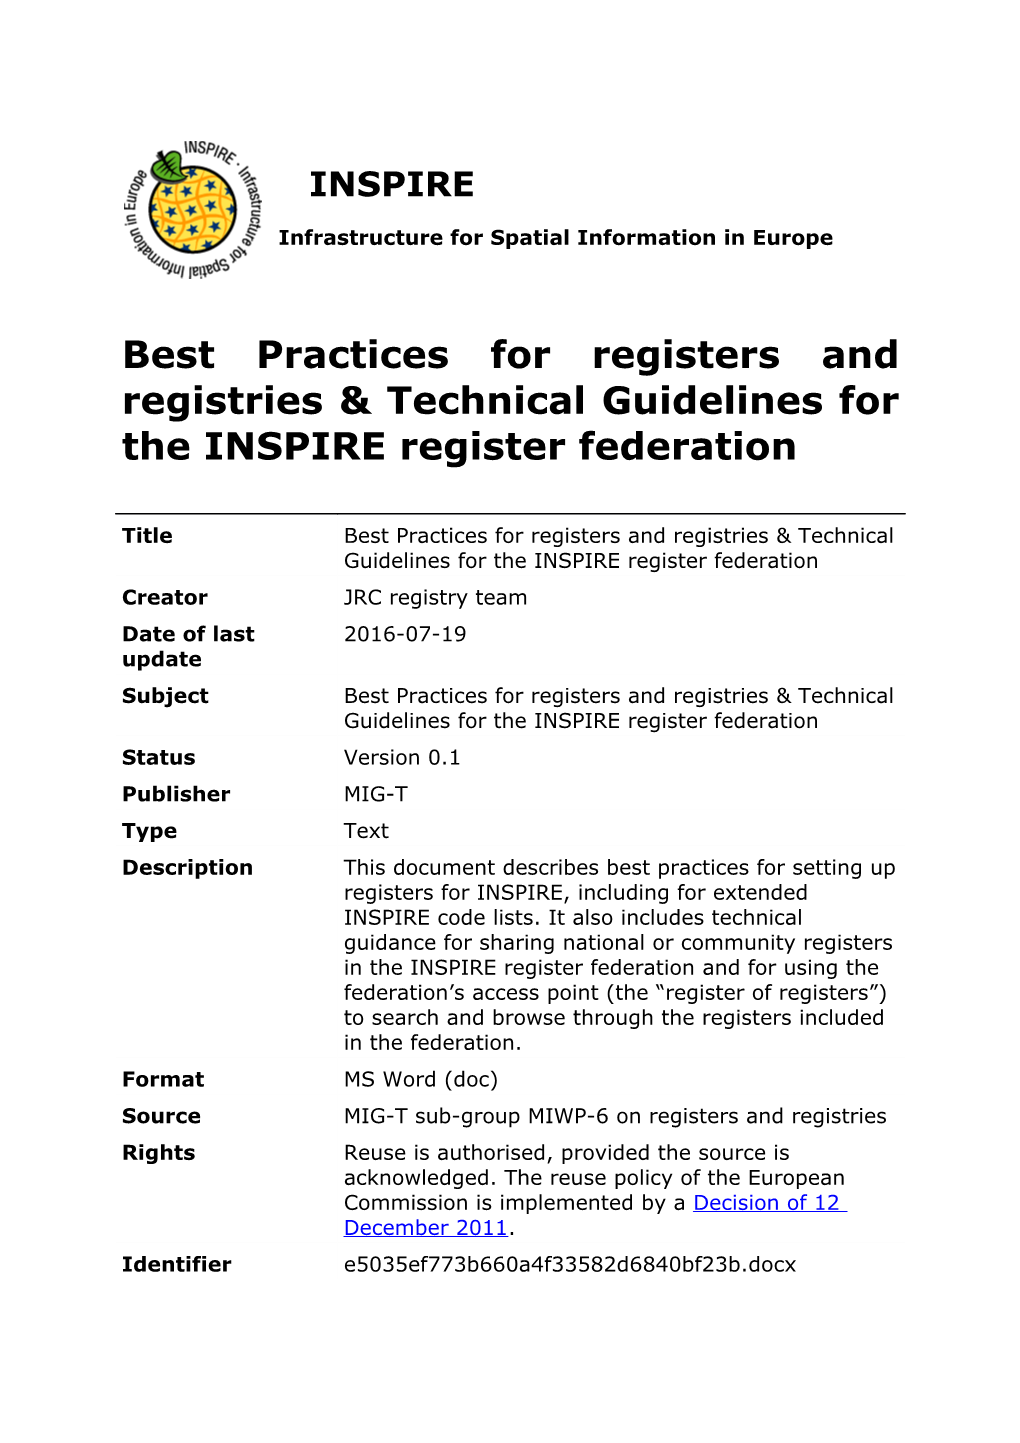 Technical Guidelines & Best Practices for INSPIRE Registers and Registries